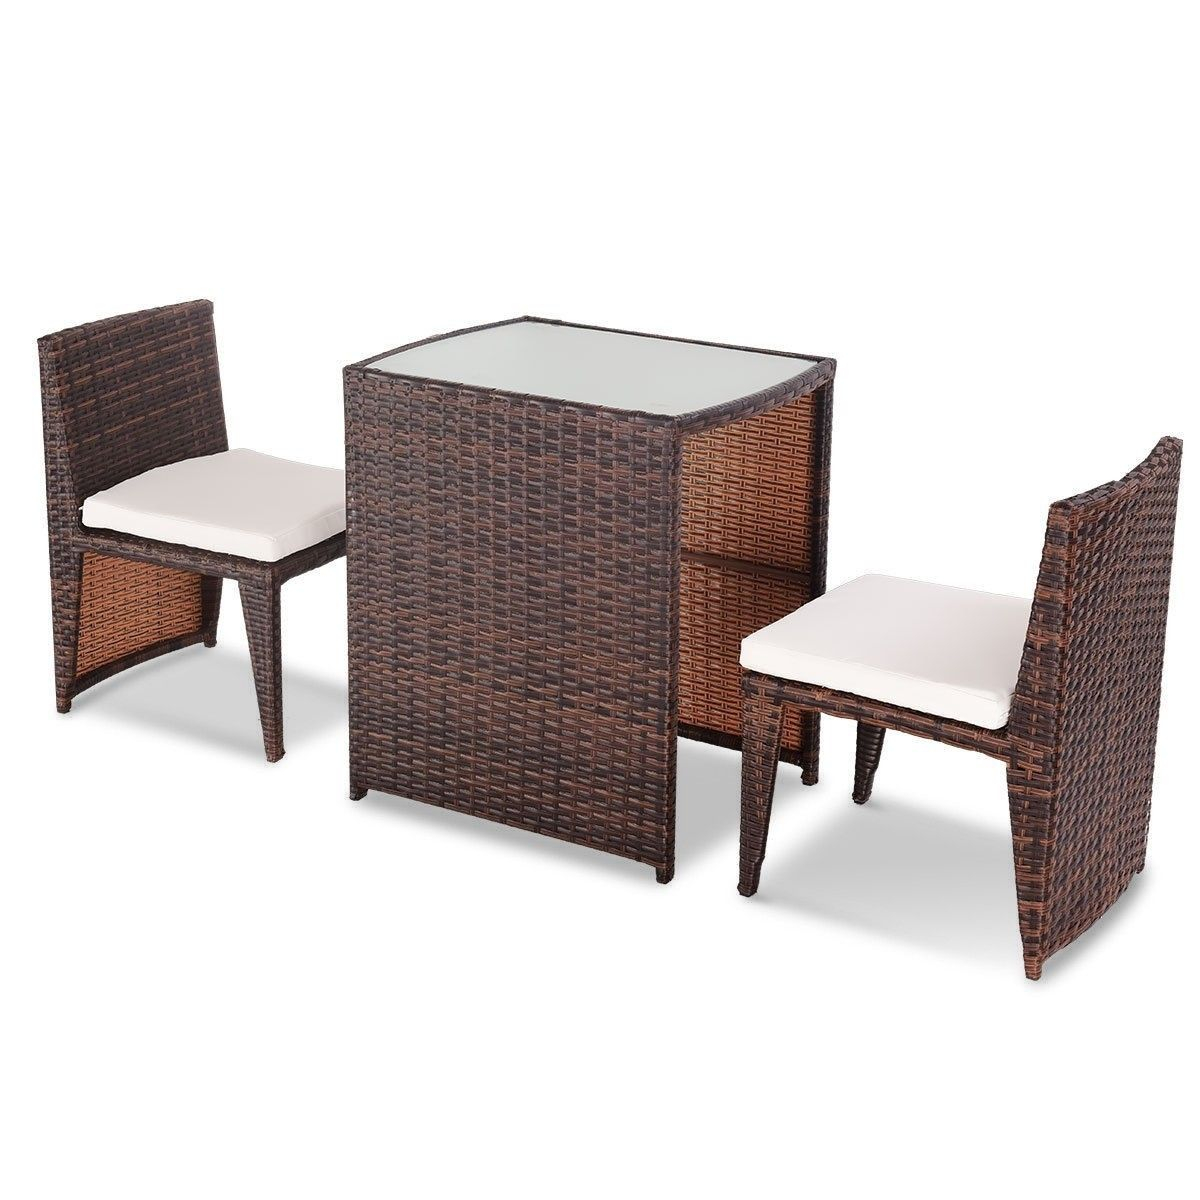 3 Pcs Cushioned Outdoor Wicker Patio Set In 2019 Patio pertaining to proportions 1200 X 1200